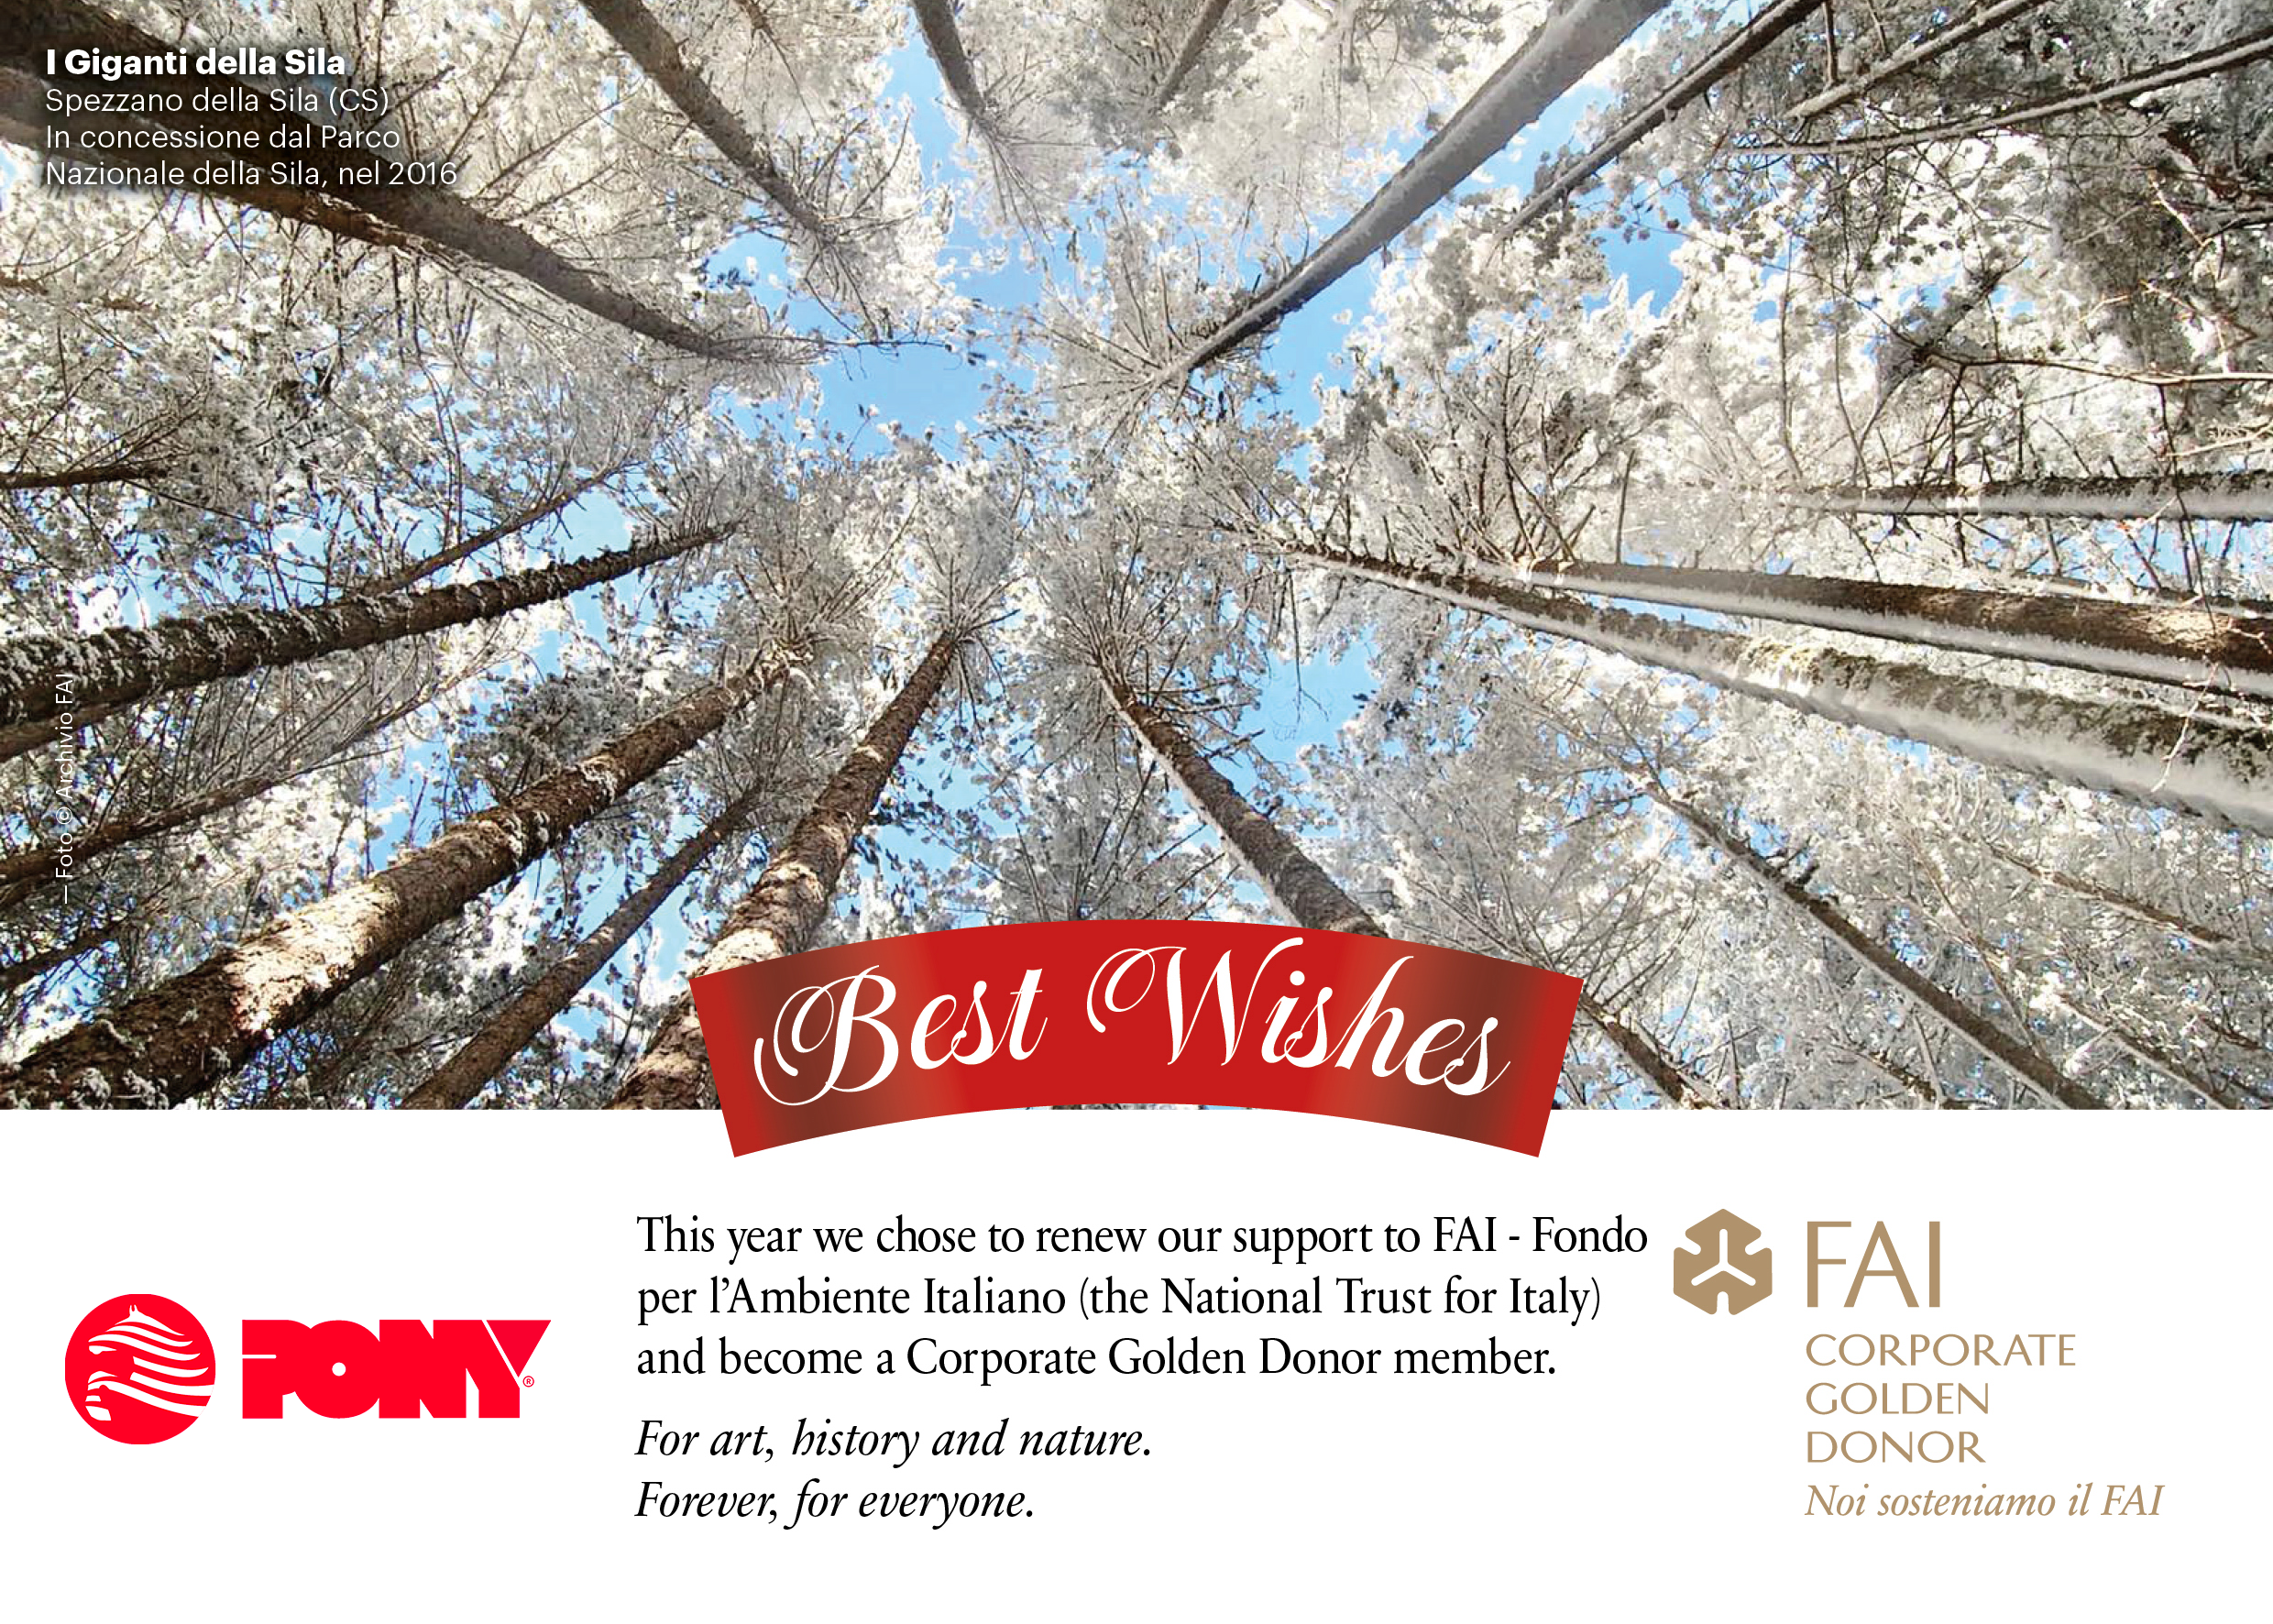 MERRY CHRISTMAS FROM PONY AND FAI, TOGETHER TO PRESERVE OUR TREASURES